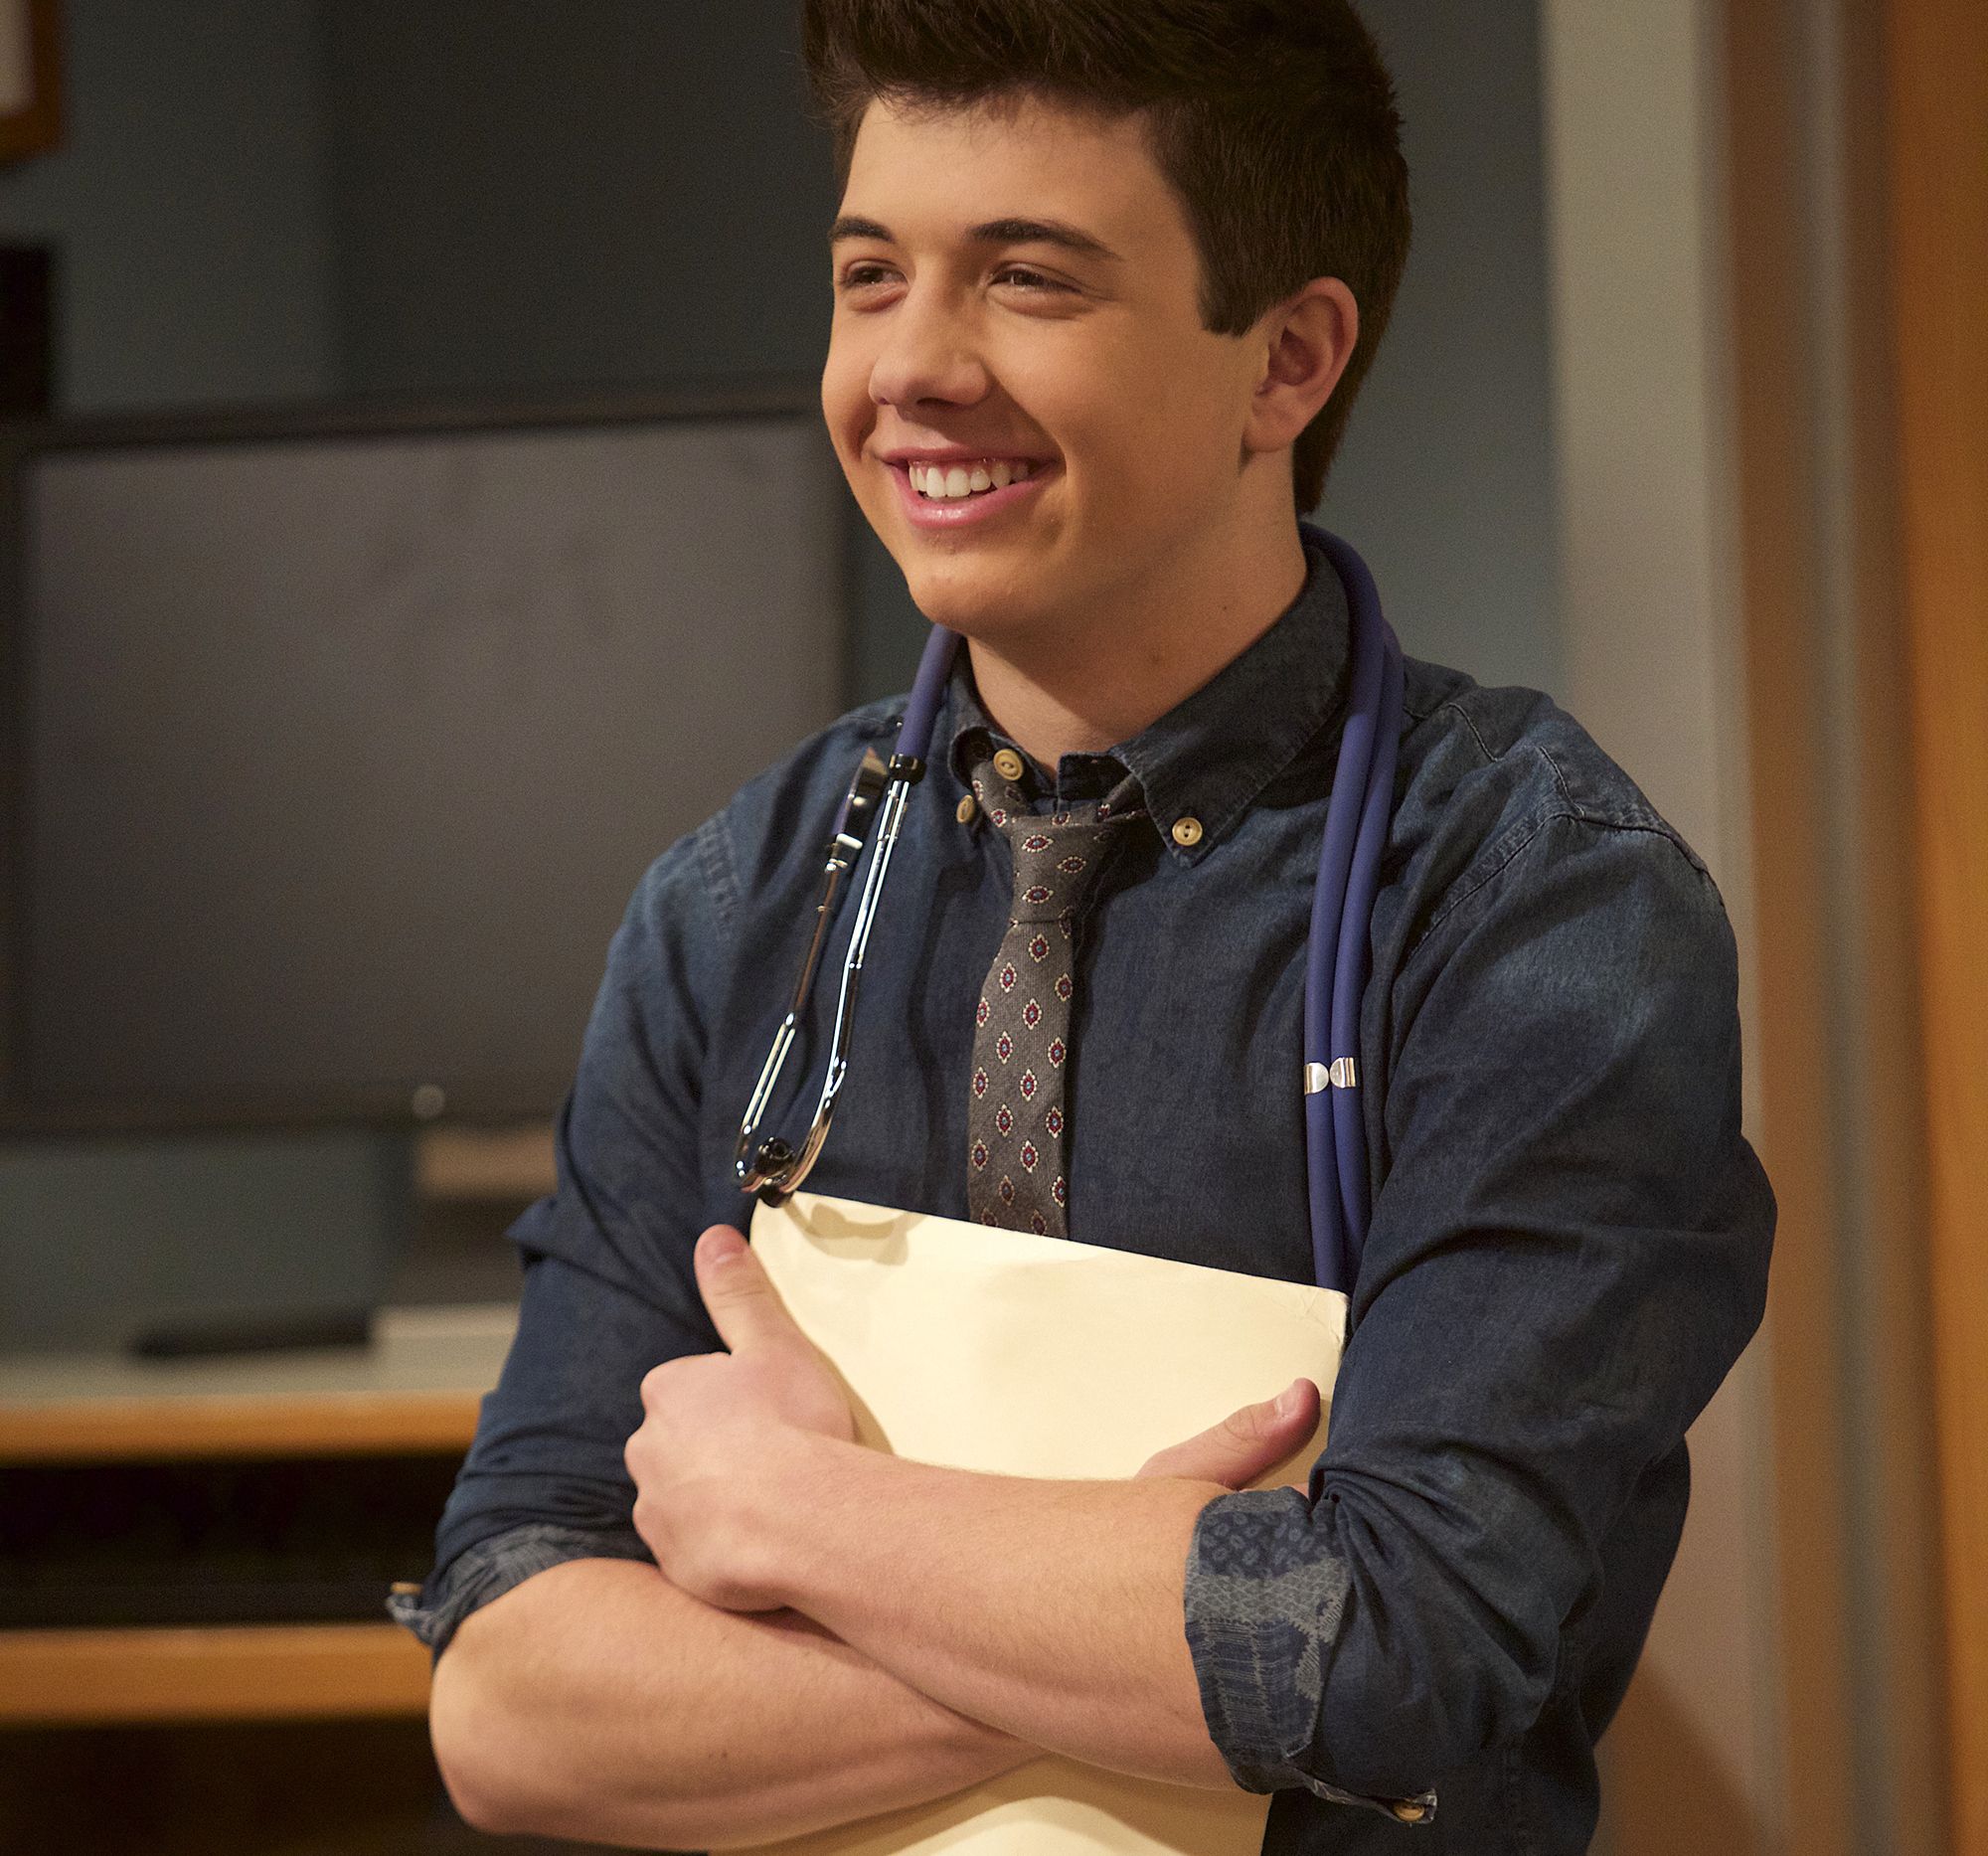 Picture of Bradley Steven Perry Of Celebrities